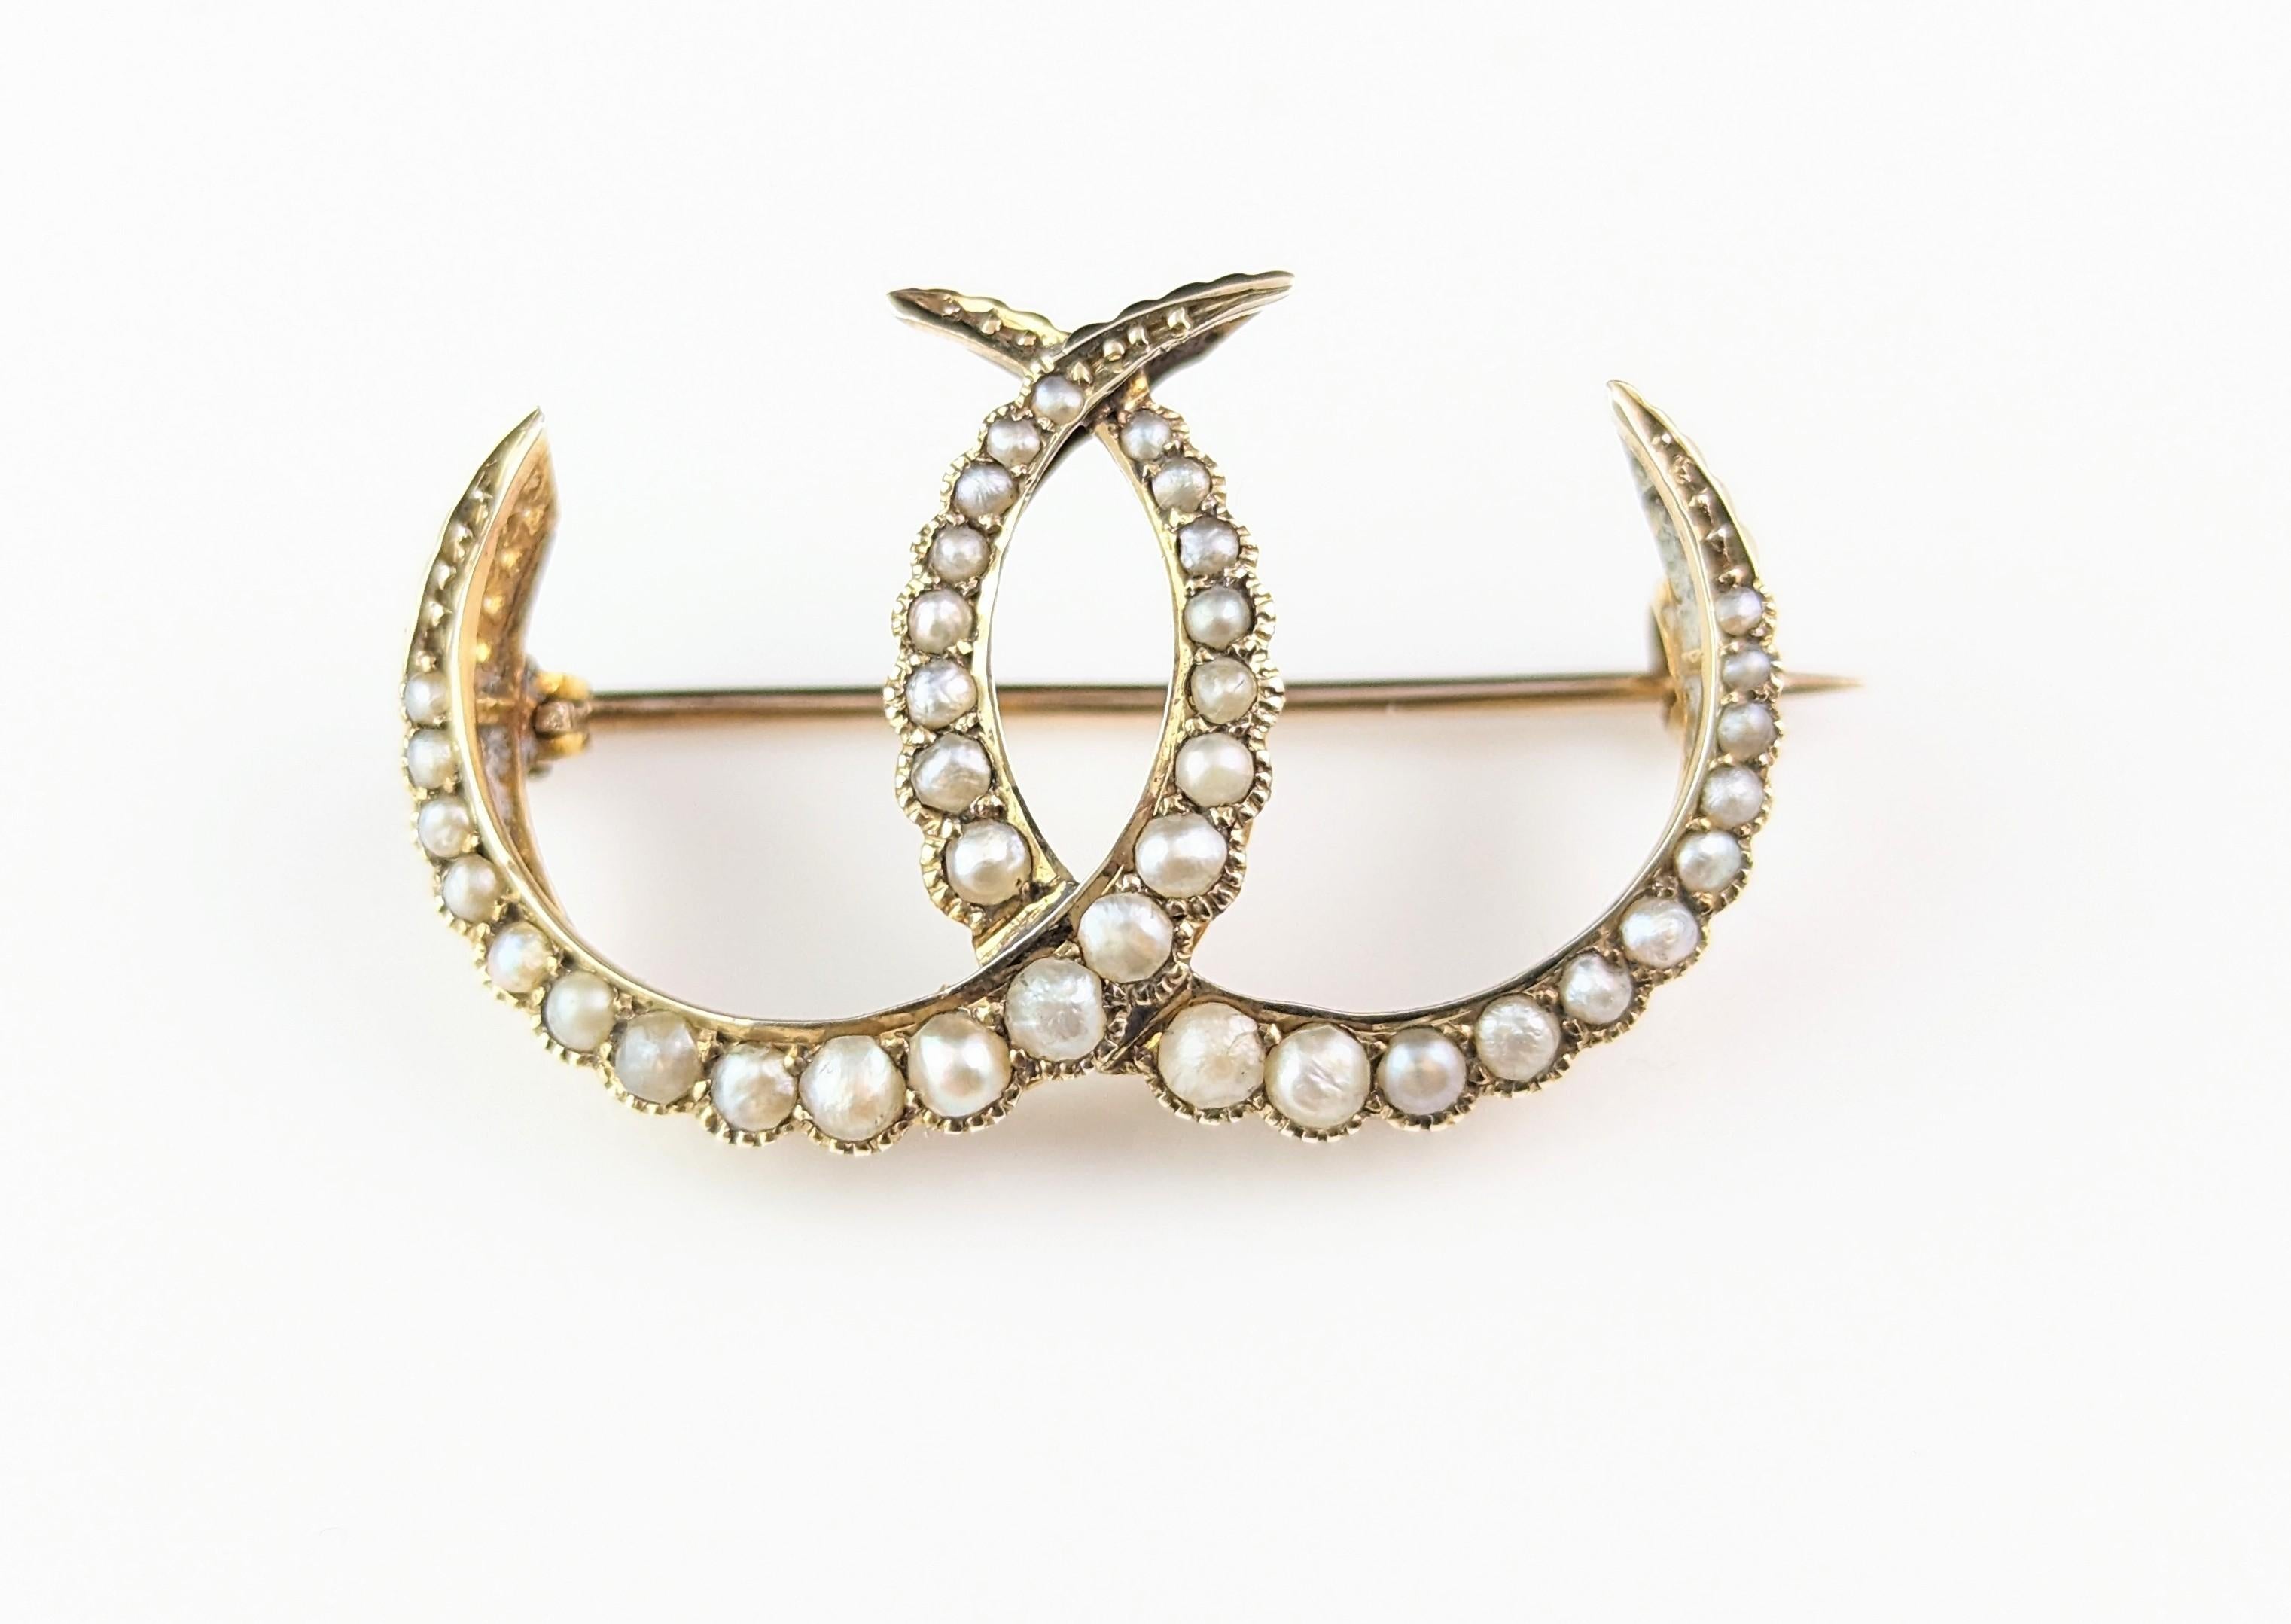 Antique 9k gold and Pearl Double Crescent Moon brooch, Murrle Bennett  For Sale 6